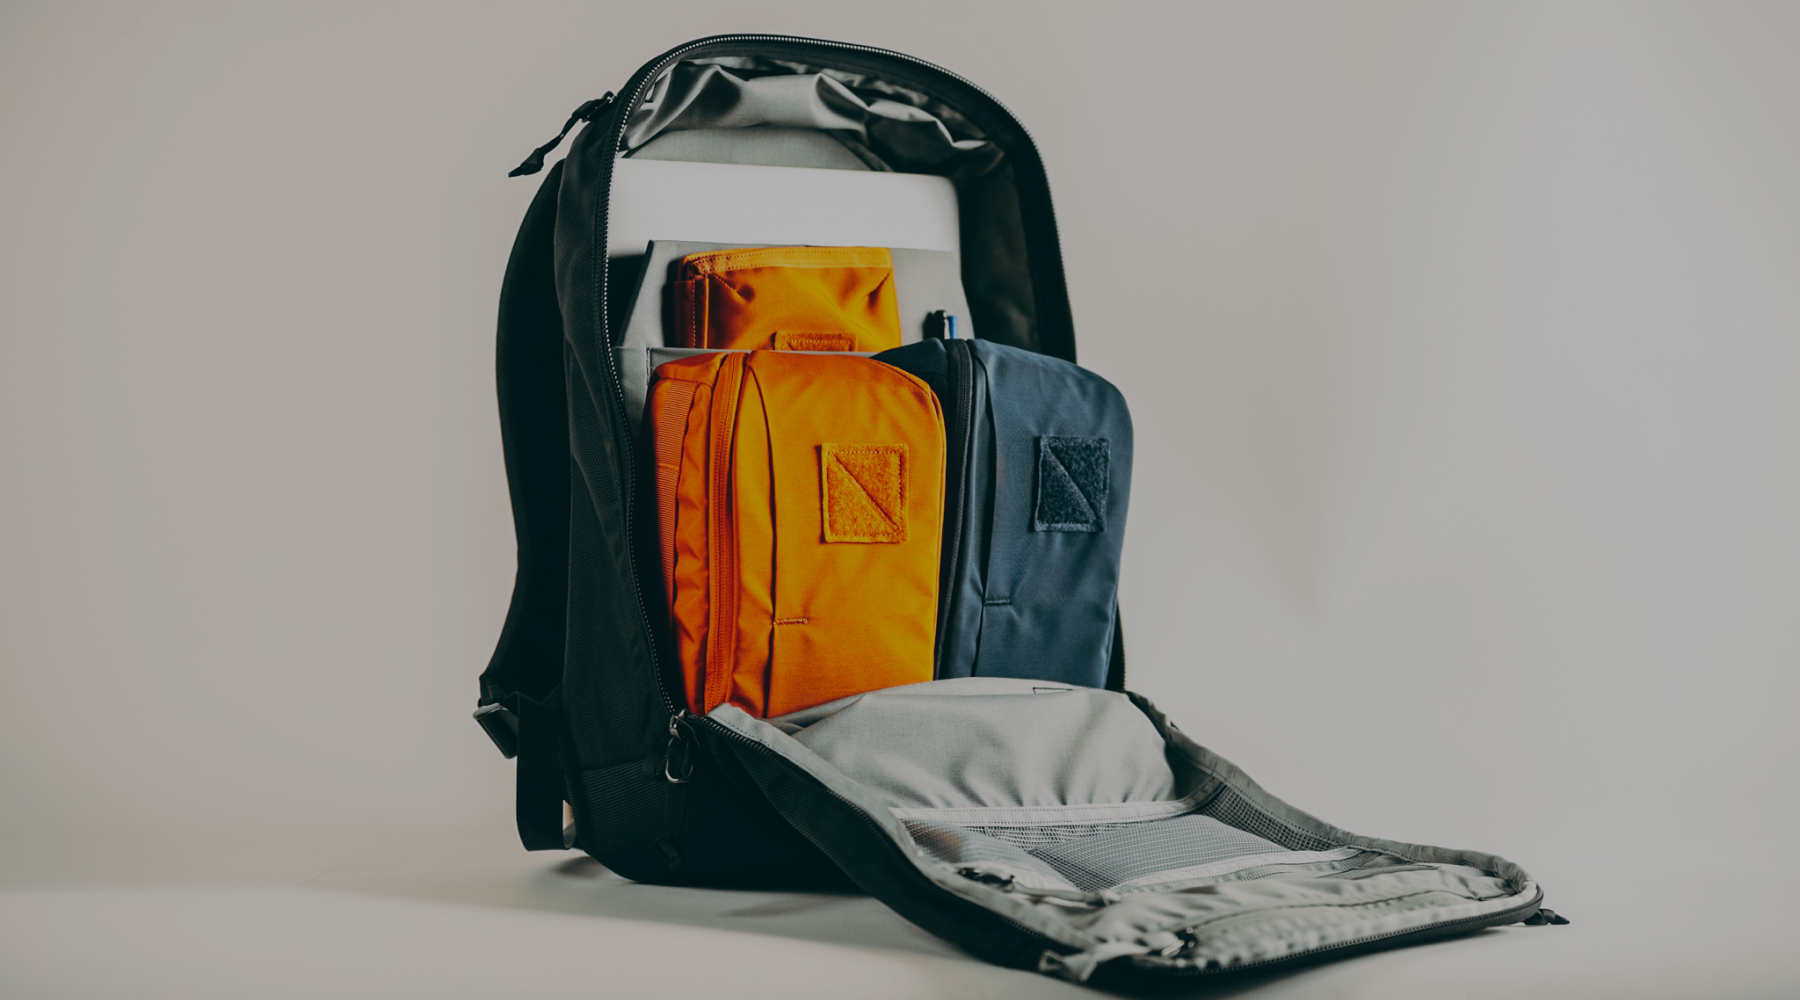 EVERGOODS - Crossover Backpacks and Apparel